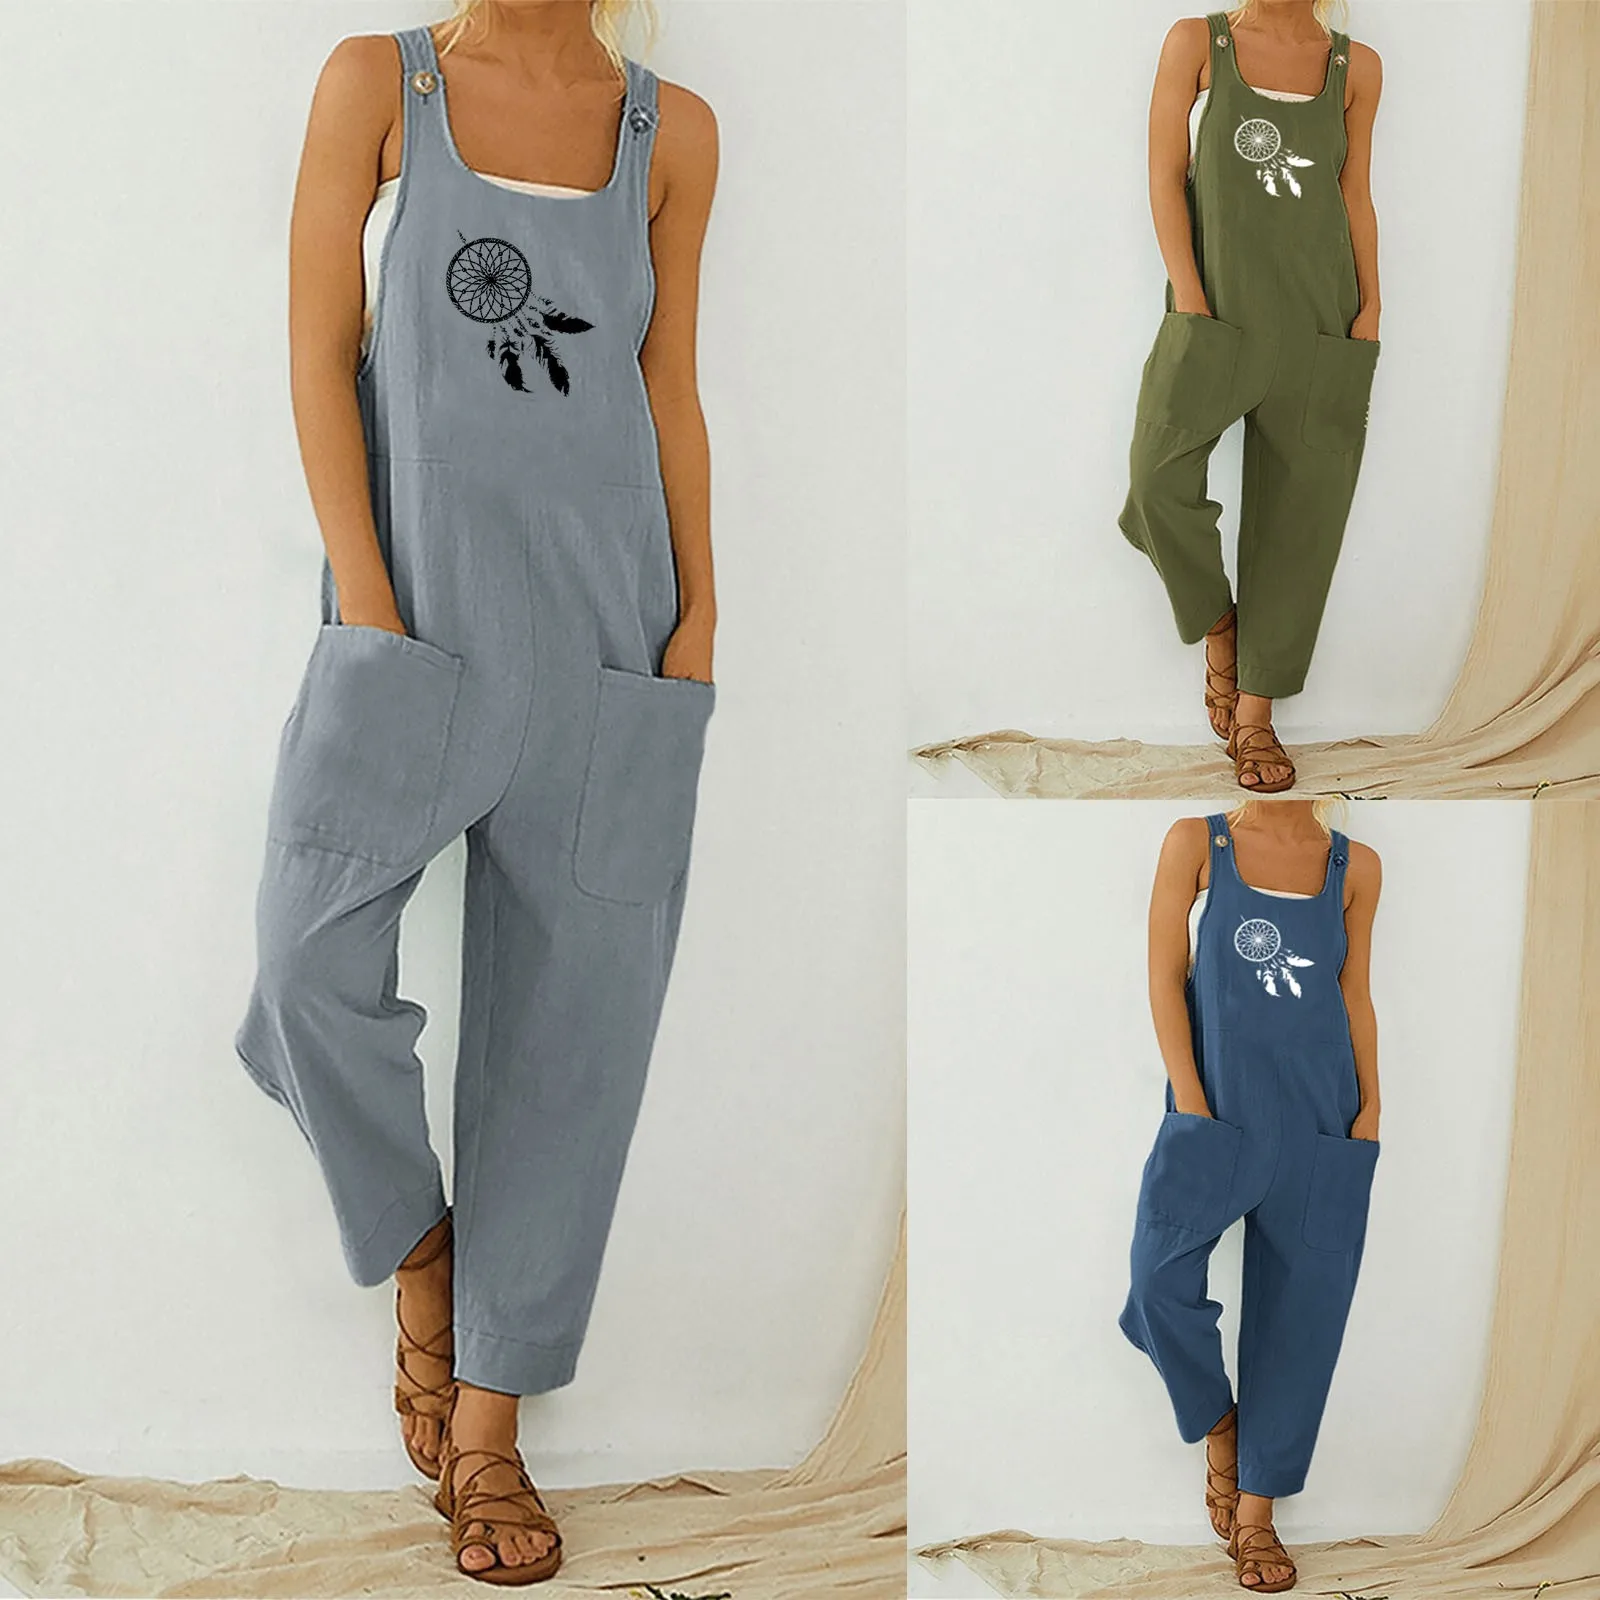 

Clothing Jumpsuits Woman Clothing Women Casual Jumpsuit Boho Sunfloral Pocket Dressy Romper Tall Women Summer Romper Pajamas